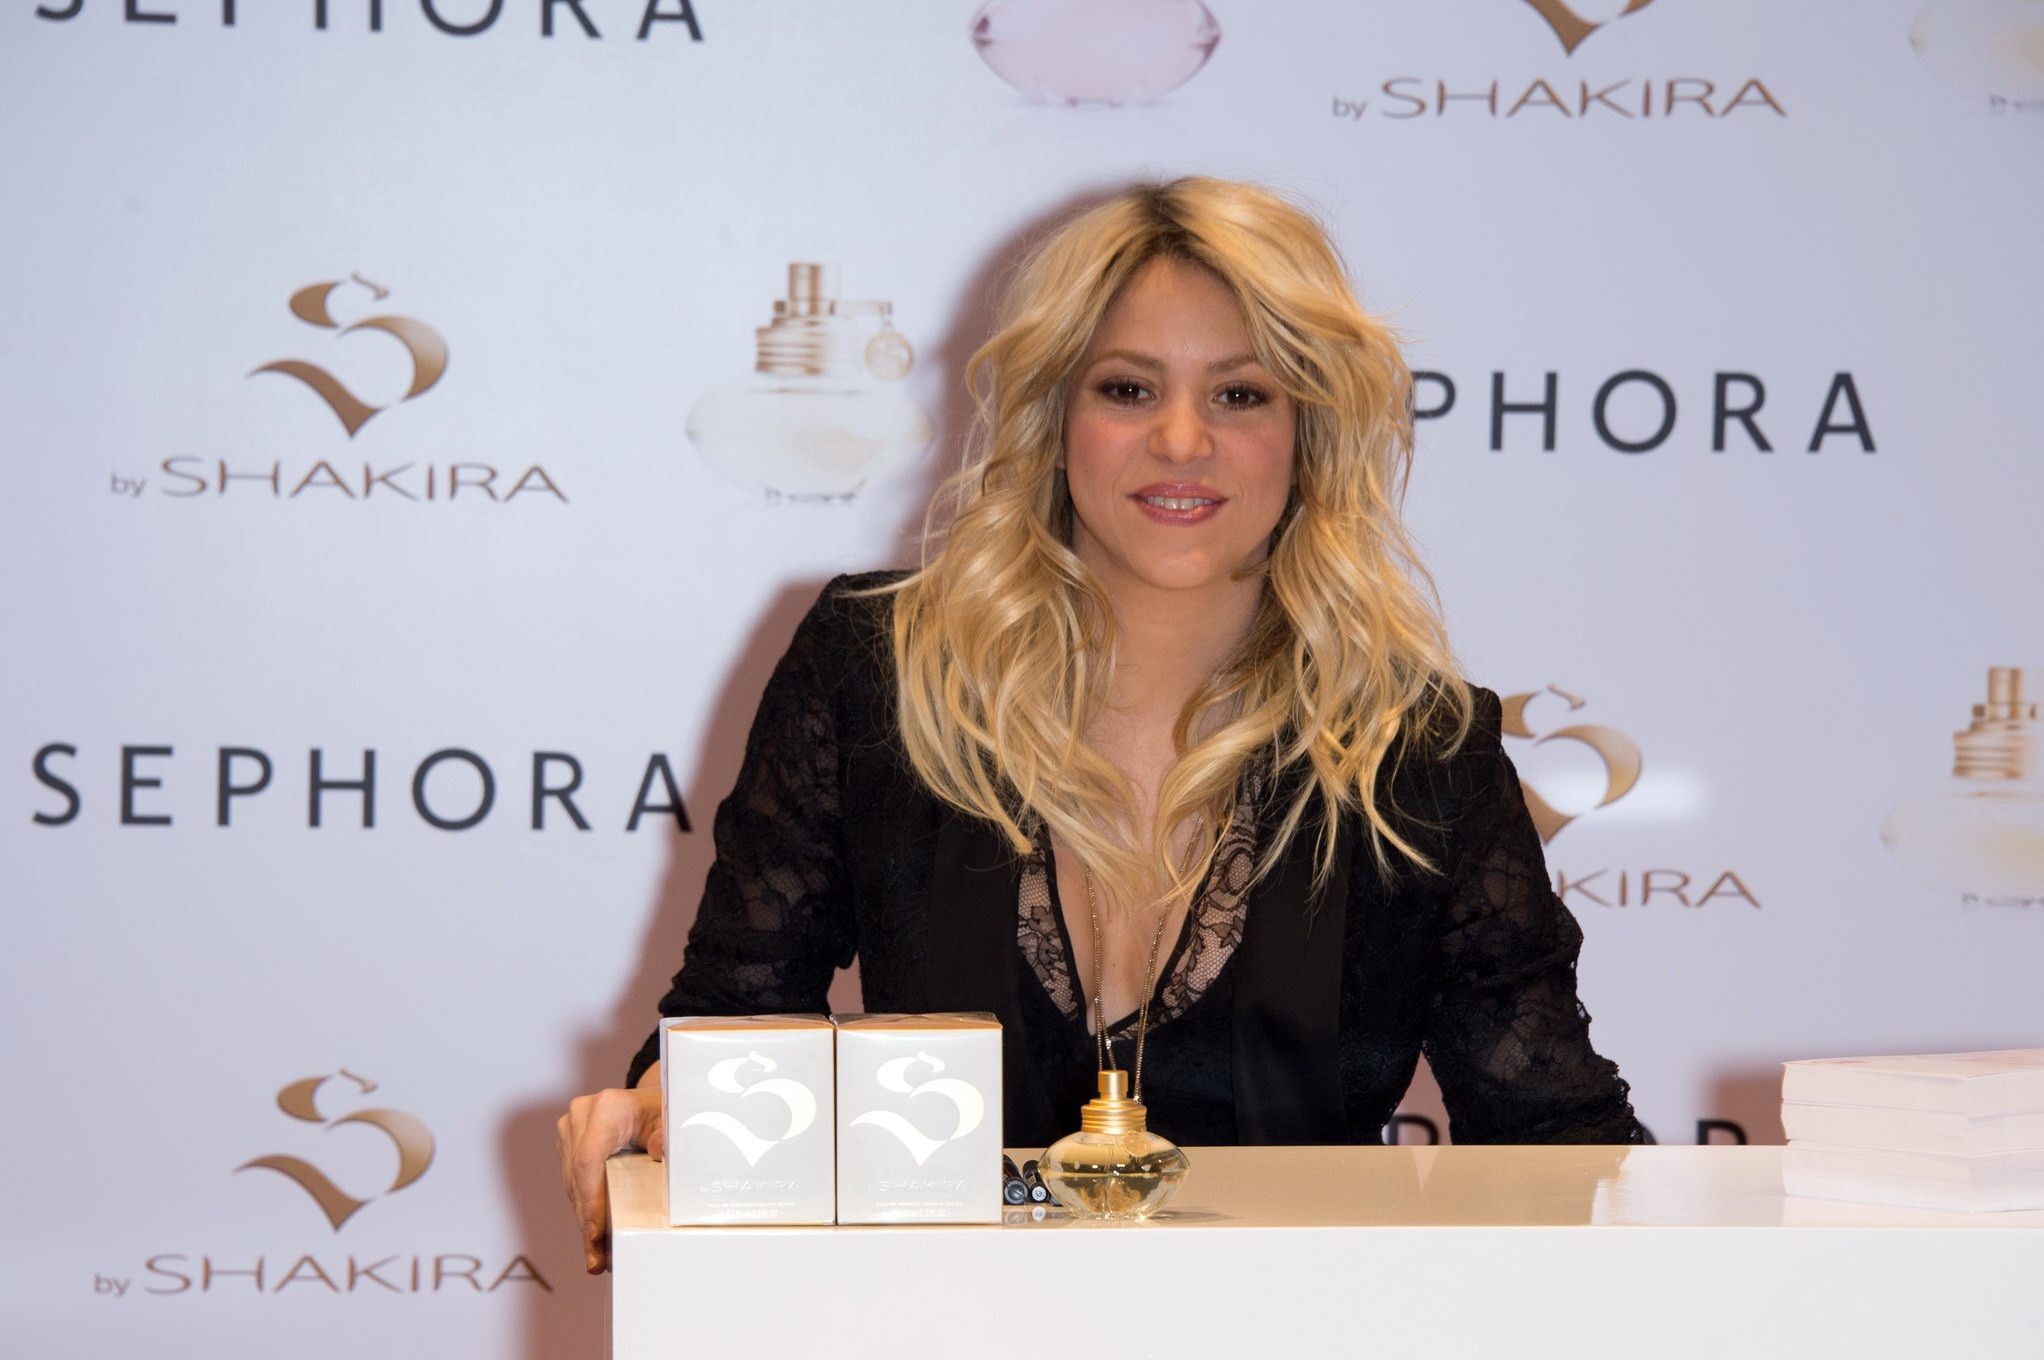 Shakira showing huge cleavage at the 'S by Shakira' perfume launch at Sephora in #75236953